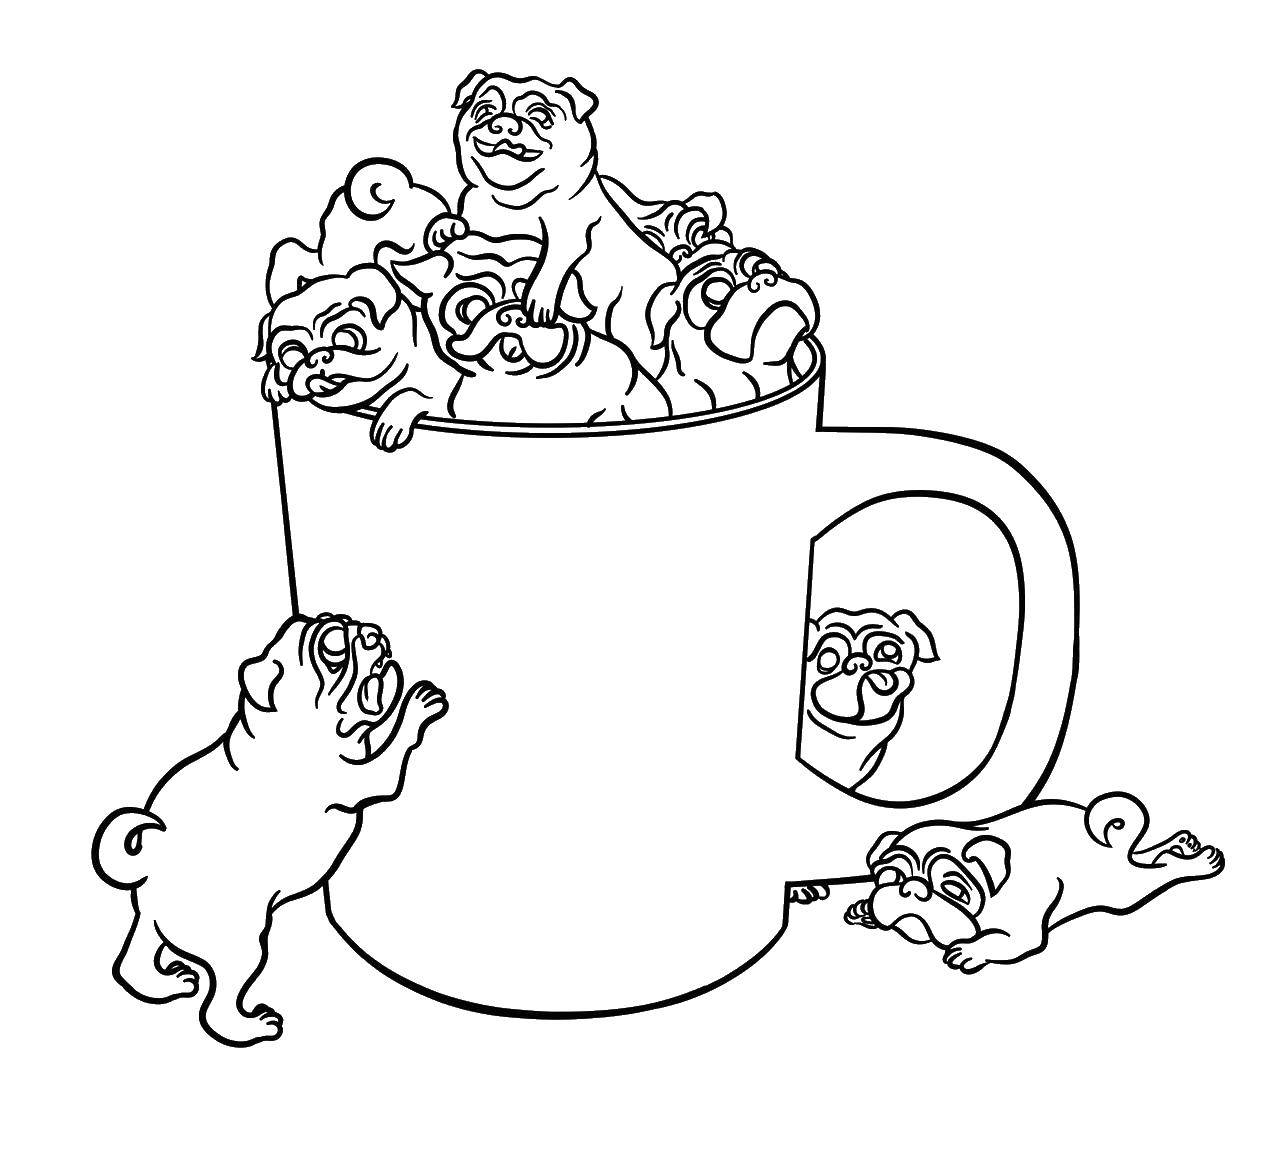 Coloring Puppies in a Cup. Category animals cubs . Tags:  mug, puppies.